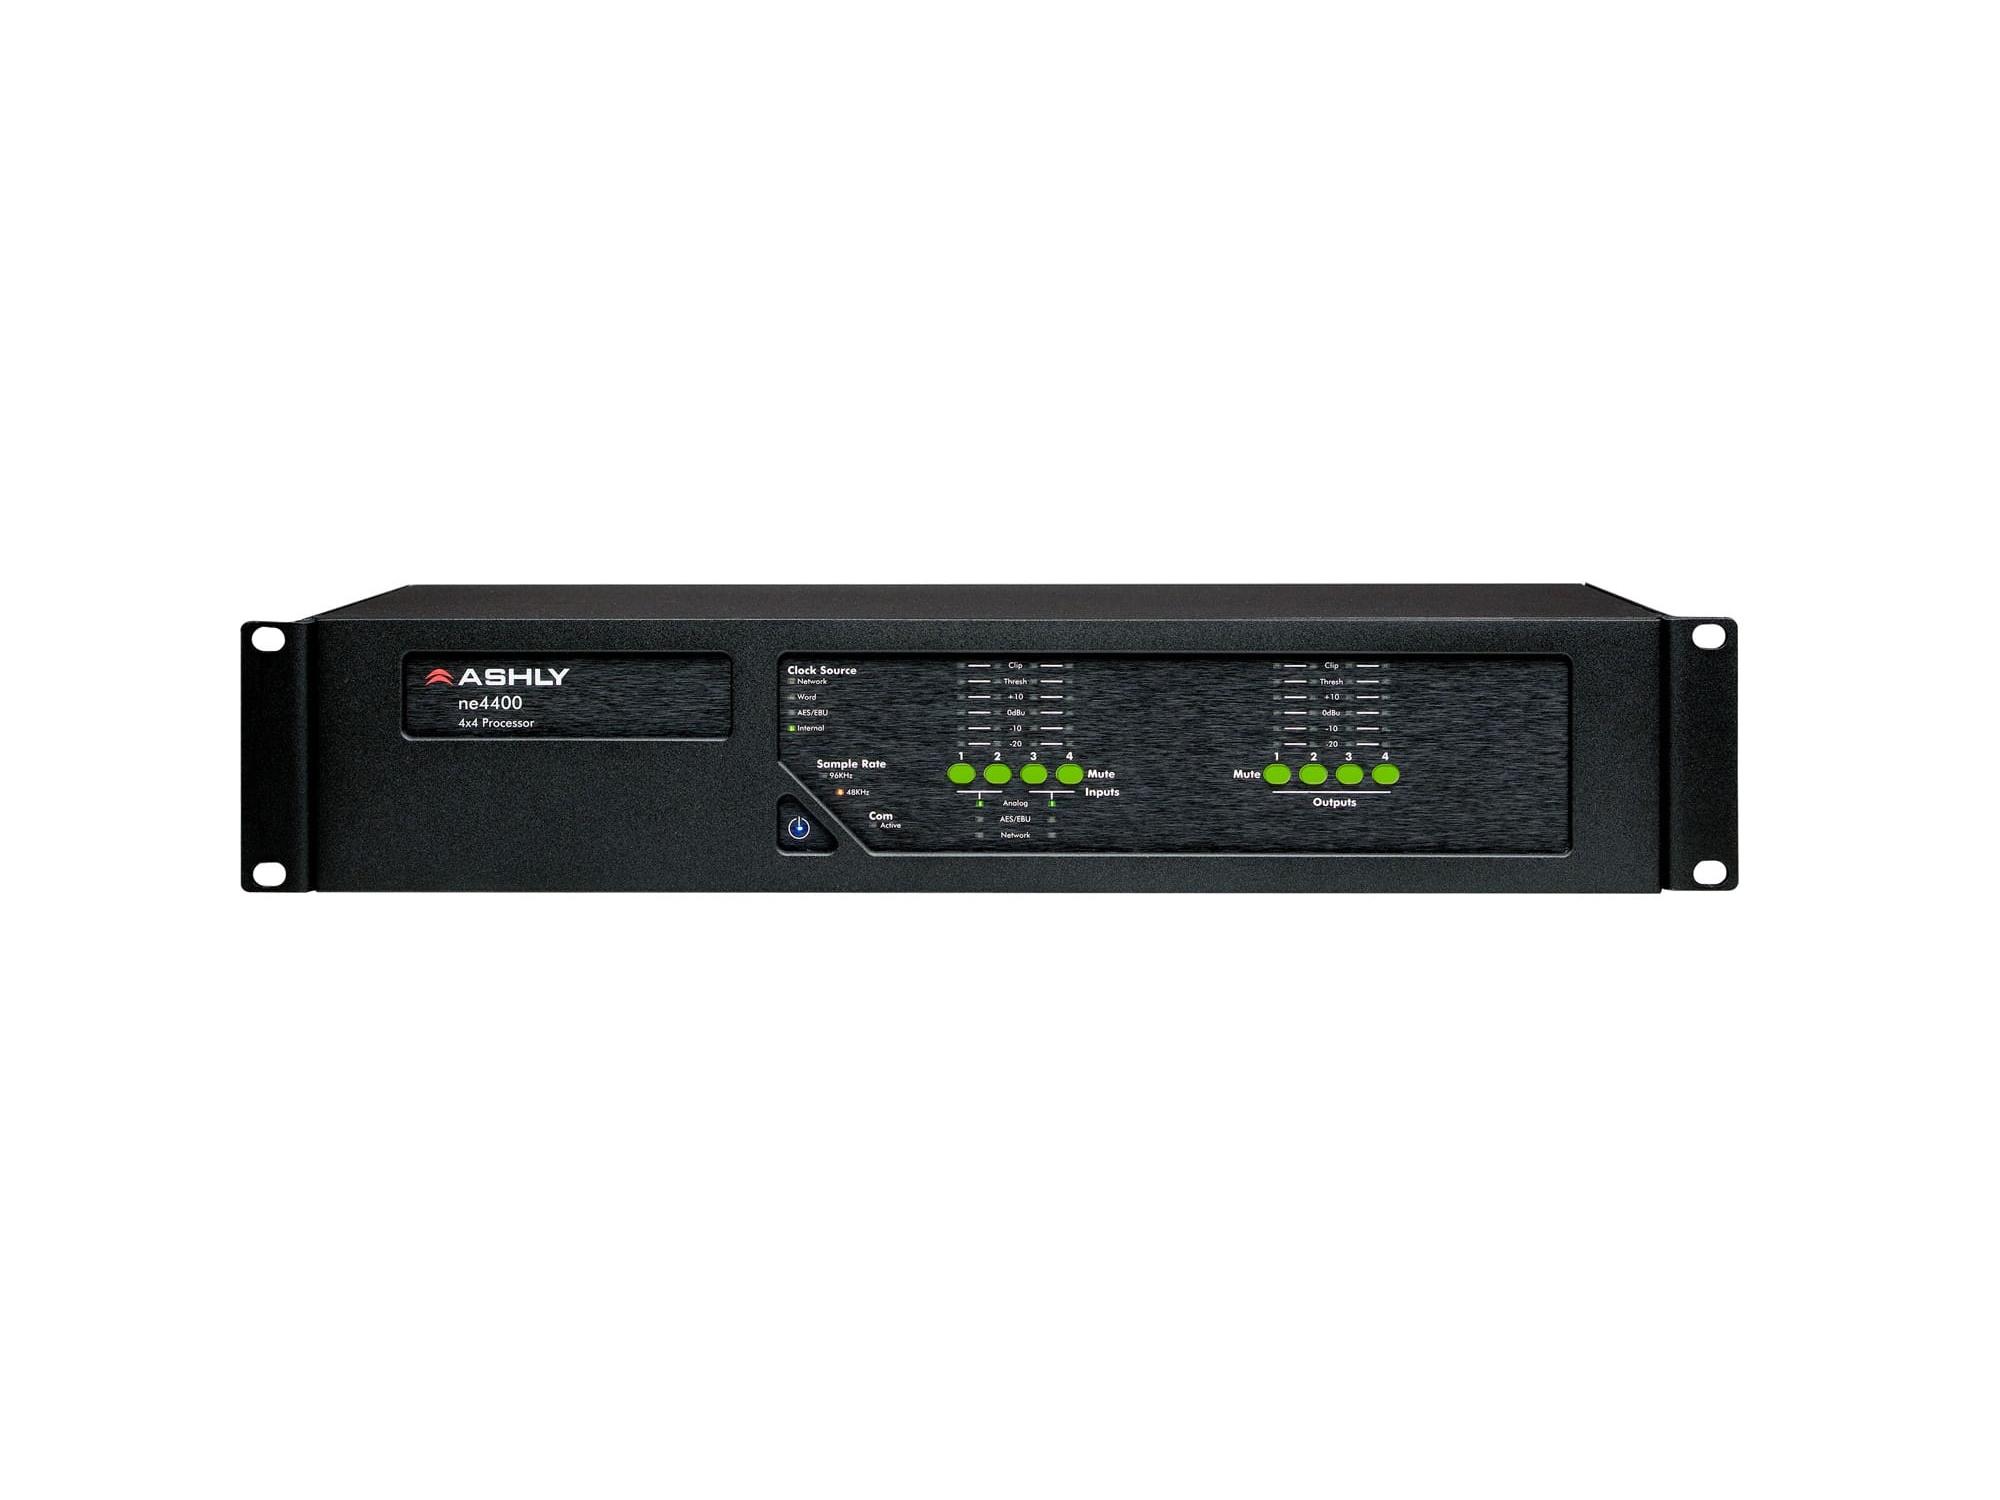 ne4400ds Network Enabled Digital Signal Processor with AES I/O Option by Ashly